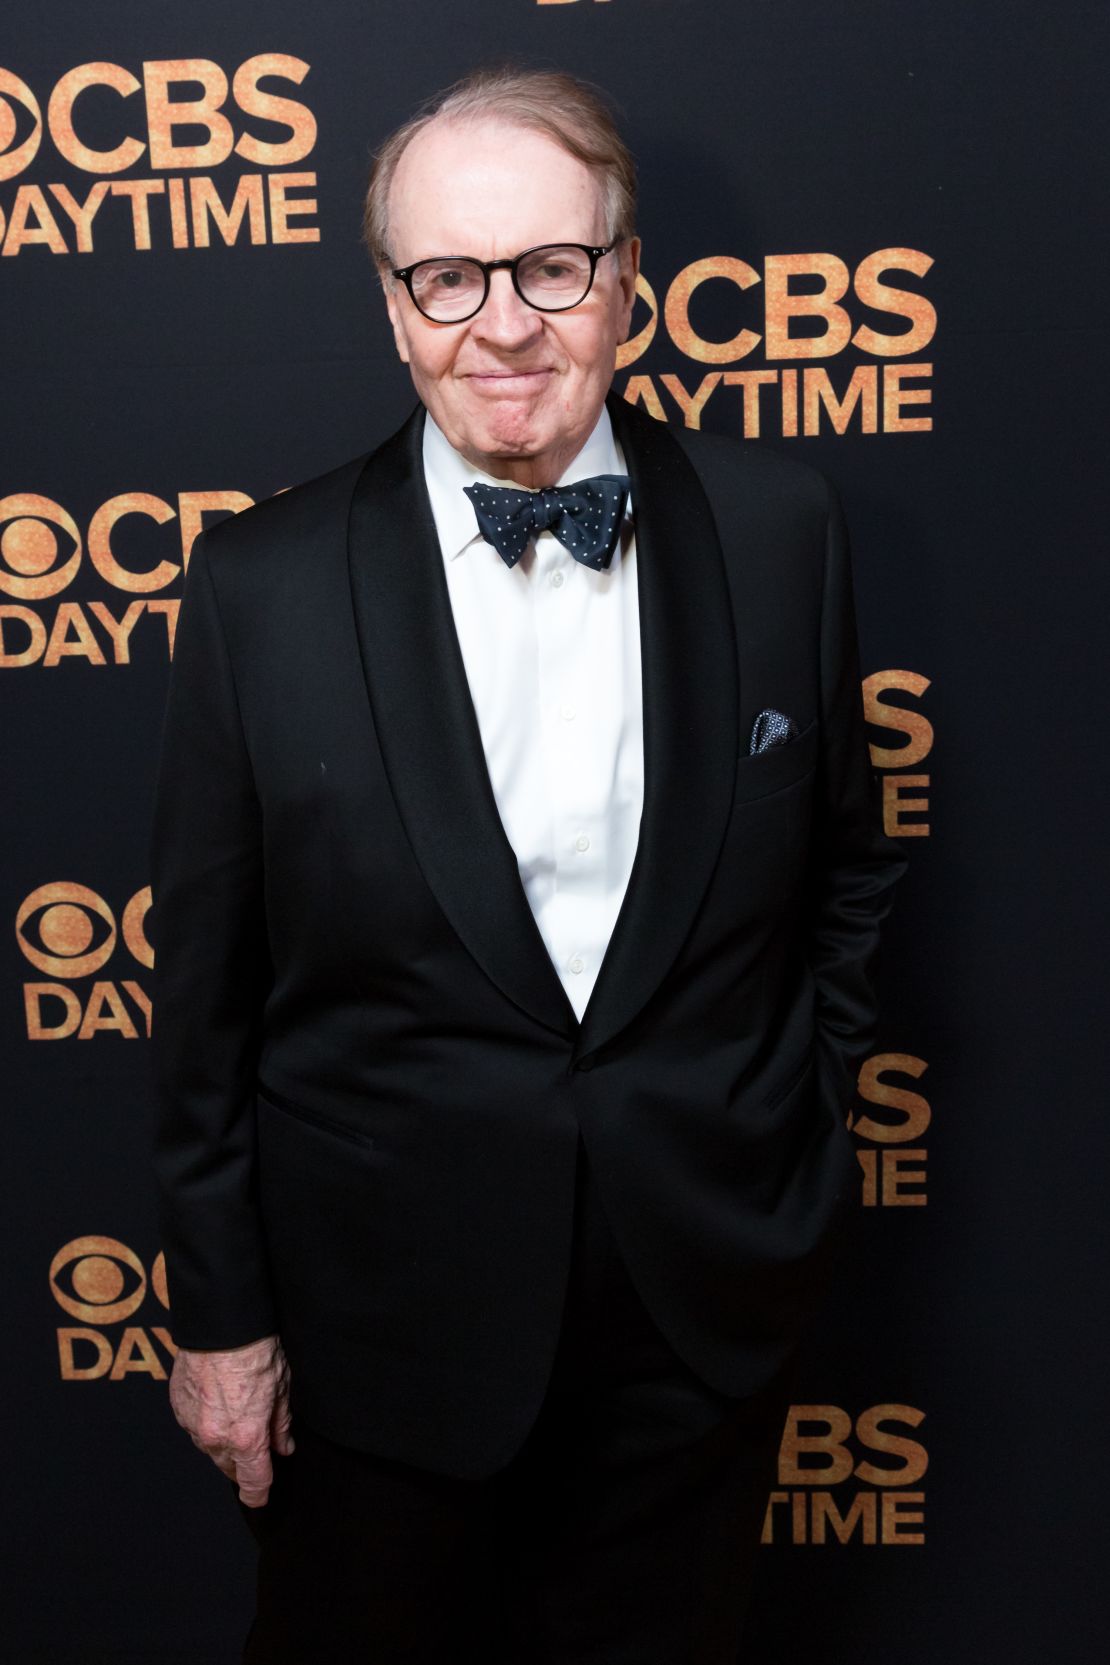 LOS ANGELES, CA - MAY 01:  Charles Osgood arrives at the CBS Daytime Emmy After Party at the Alexandria Ballrooms on May 1, 2016 in Los Angeles, California.  (Photo by Greg Doherty/Getty Images)